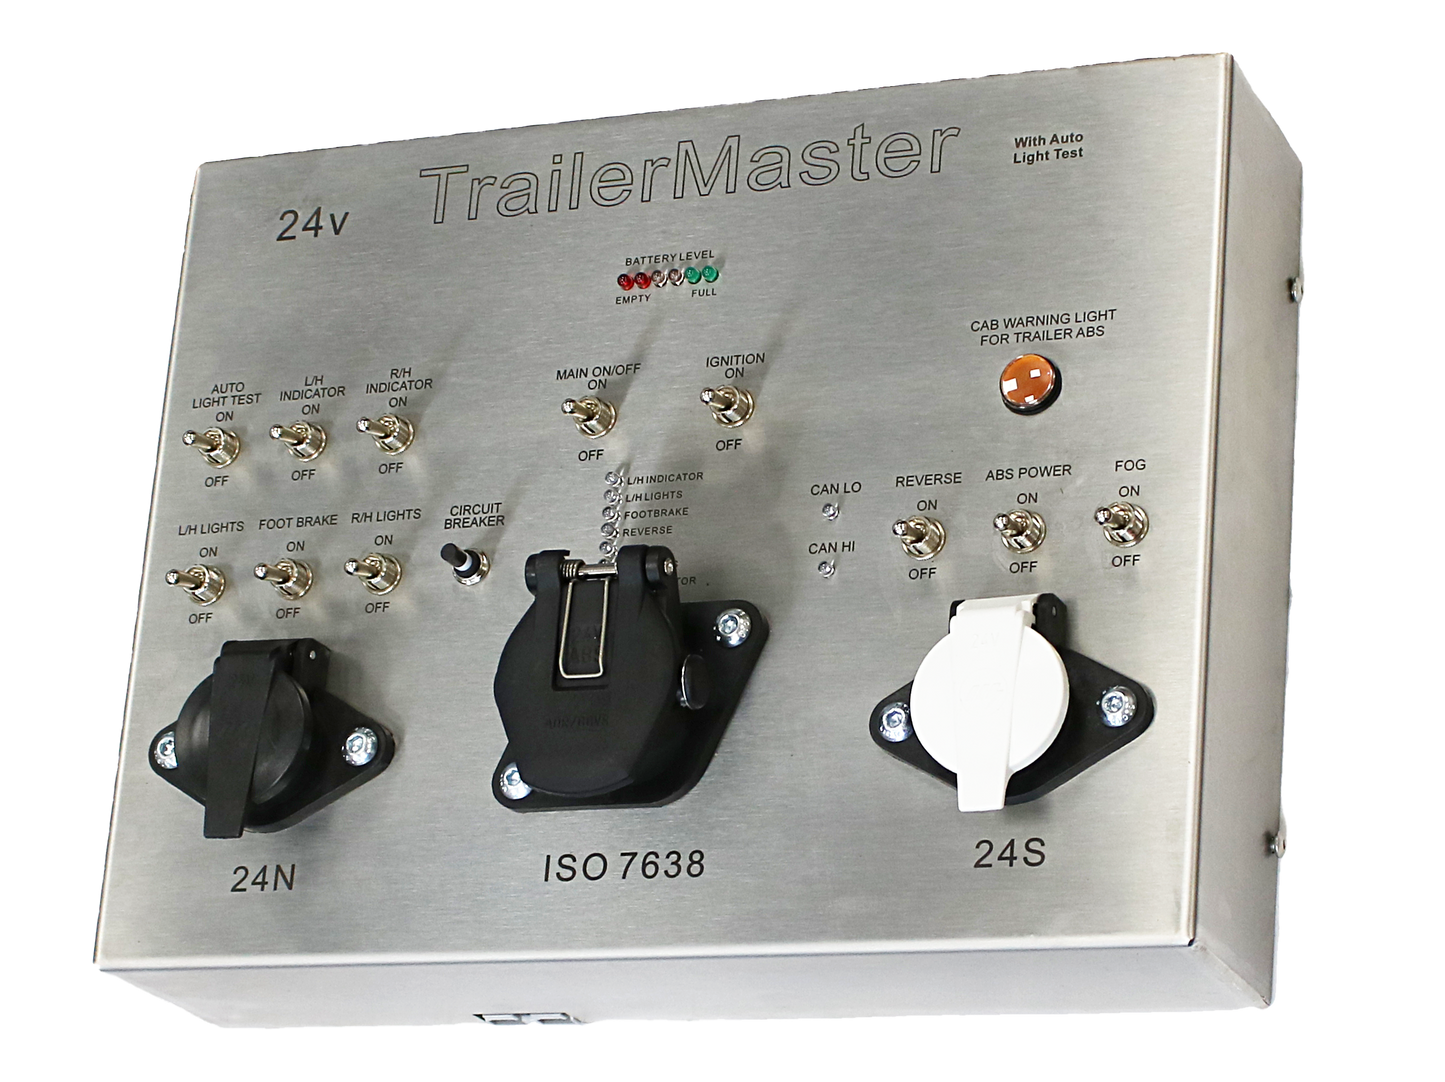 Trailer Master Van Mounted - 24v Power Box for Testing the Trailers Electrical System